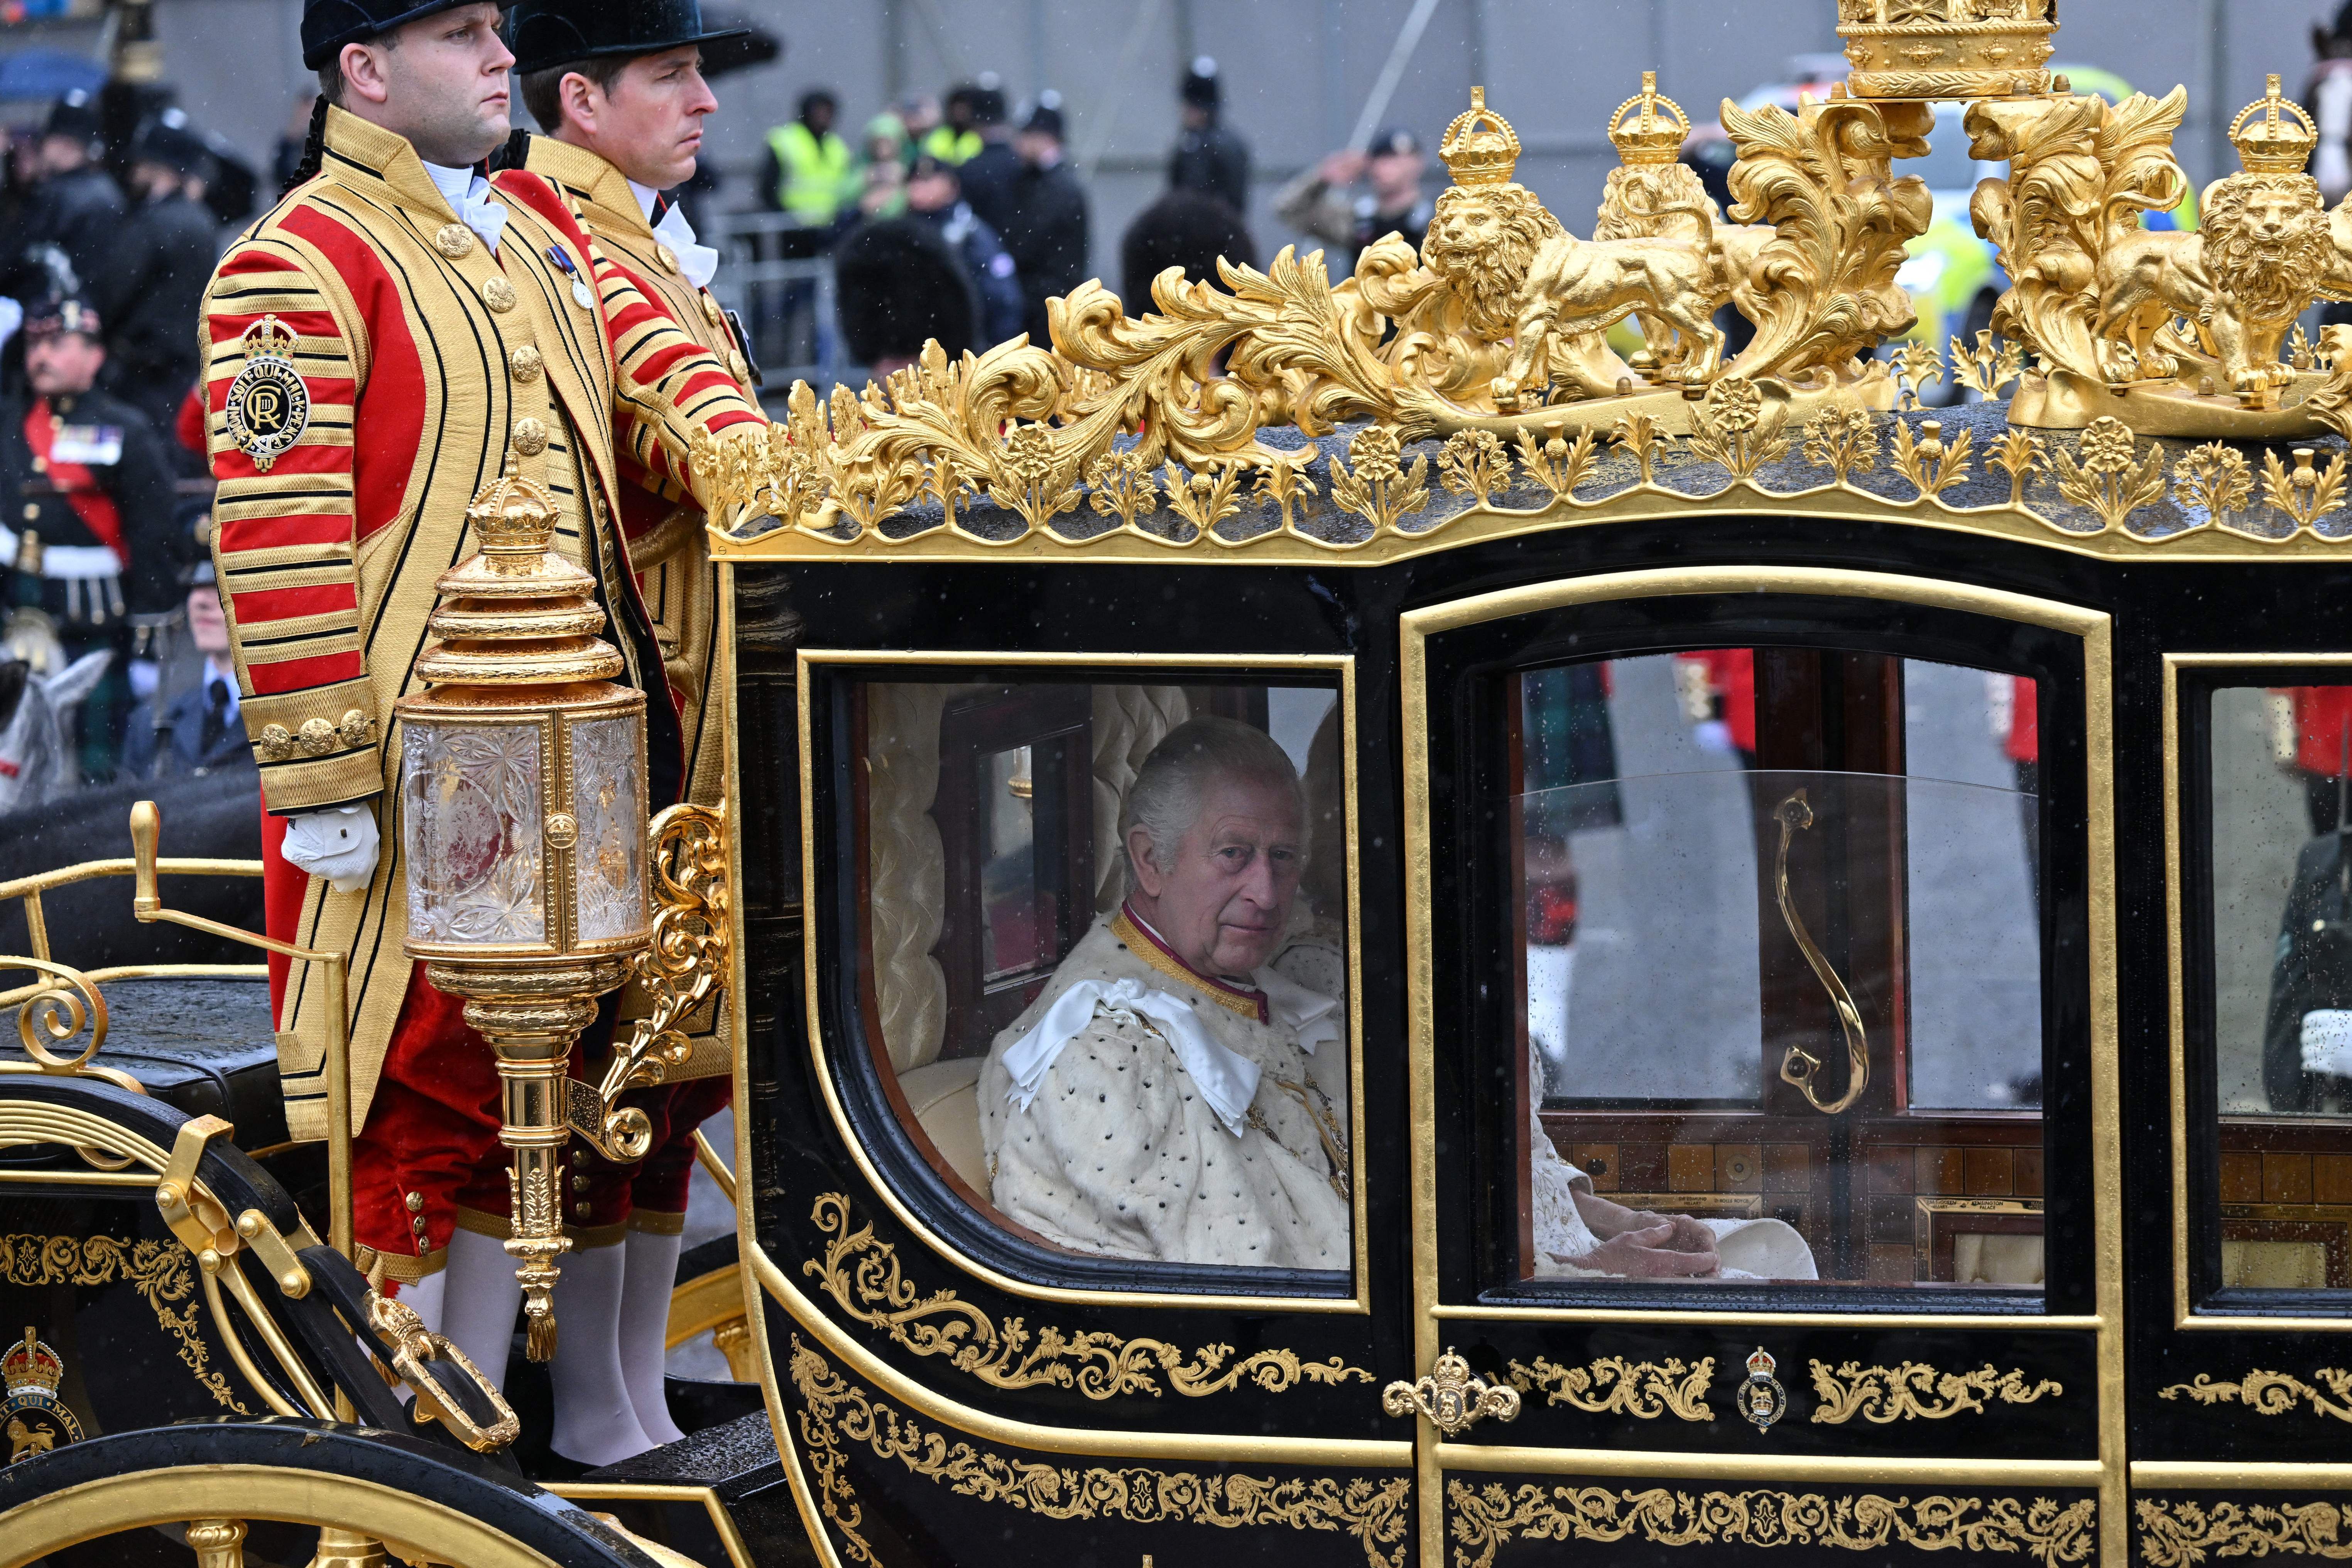 Britain's King Charles III and Britain's Camilla, Queen Consort ride in the Diamond Jubilee State Coach, during the 'King's Procession